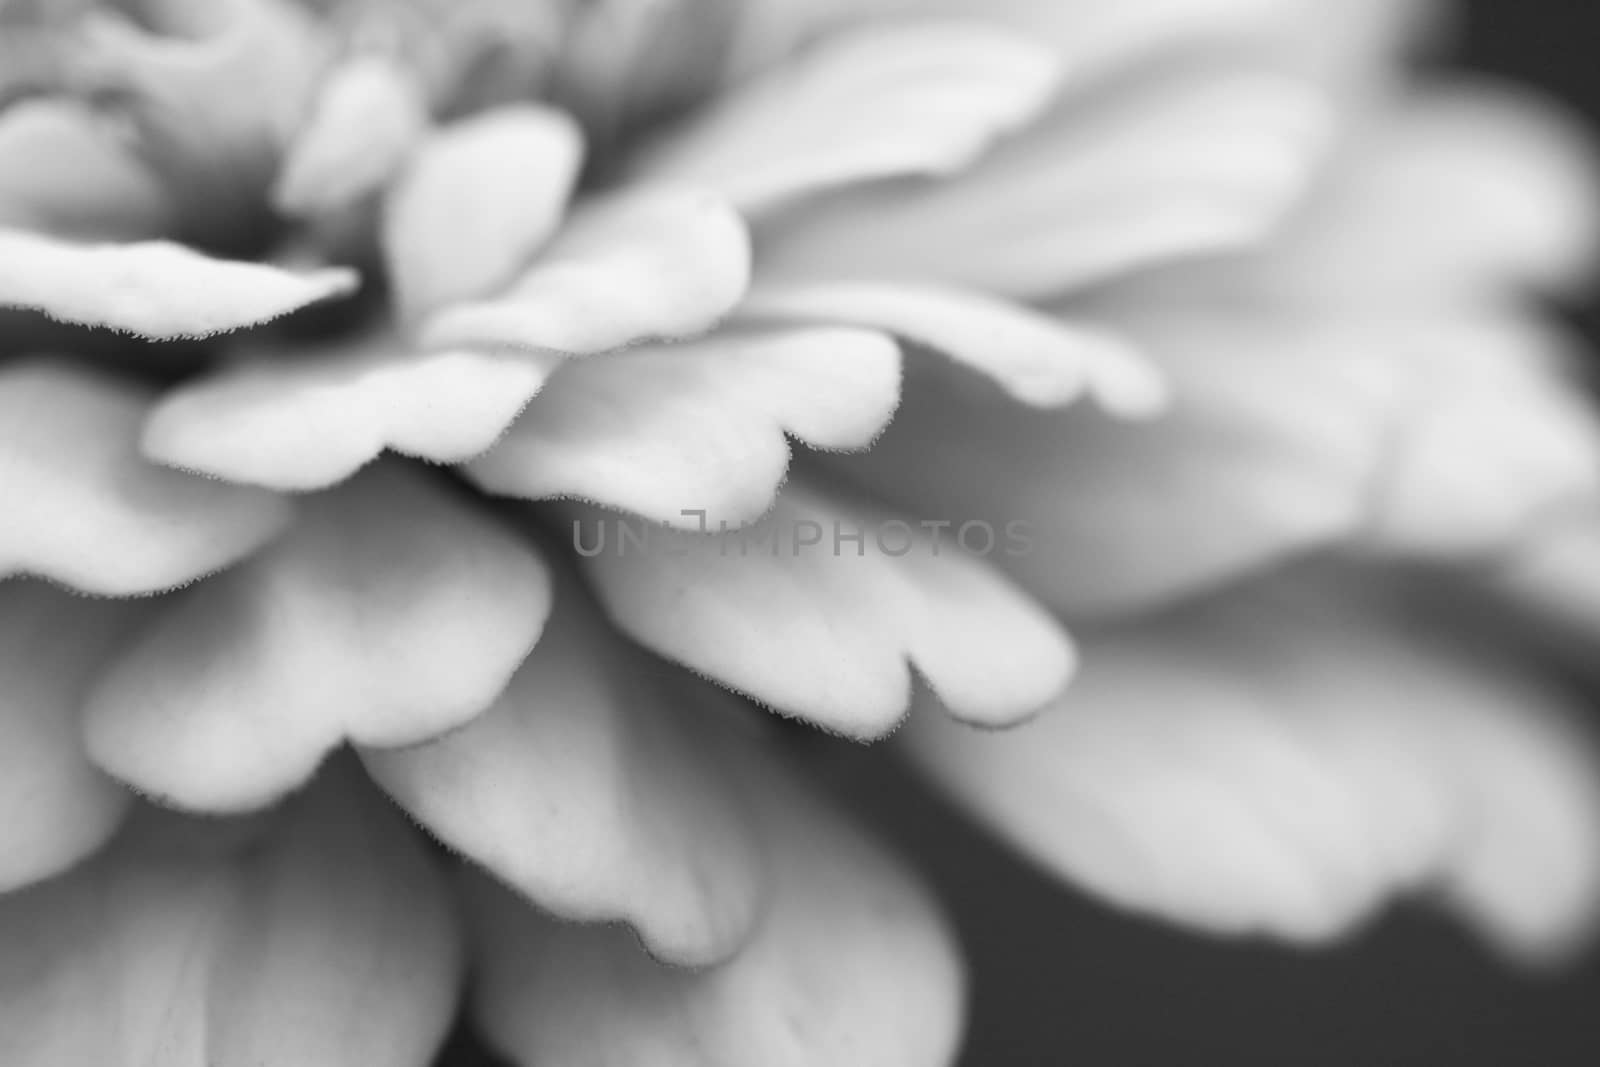 Abstract macro of layered petals of a zinnia flower - monochrome processing